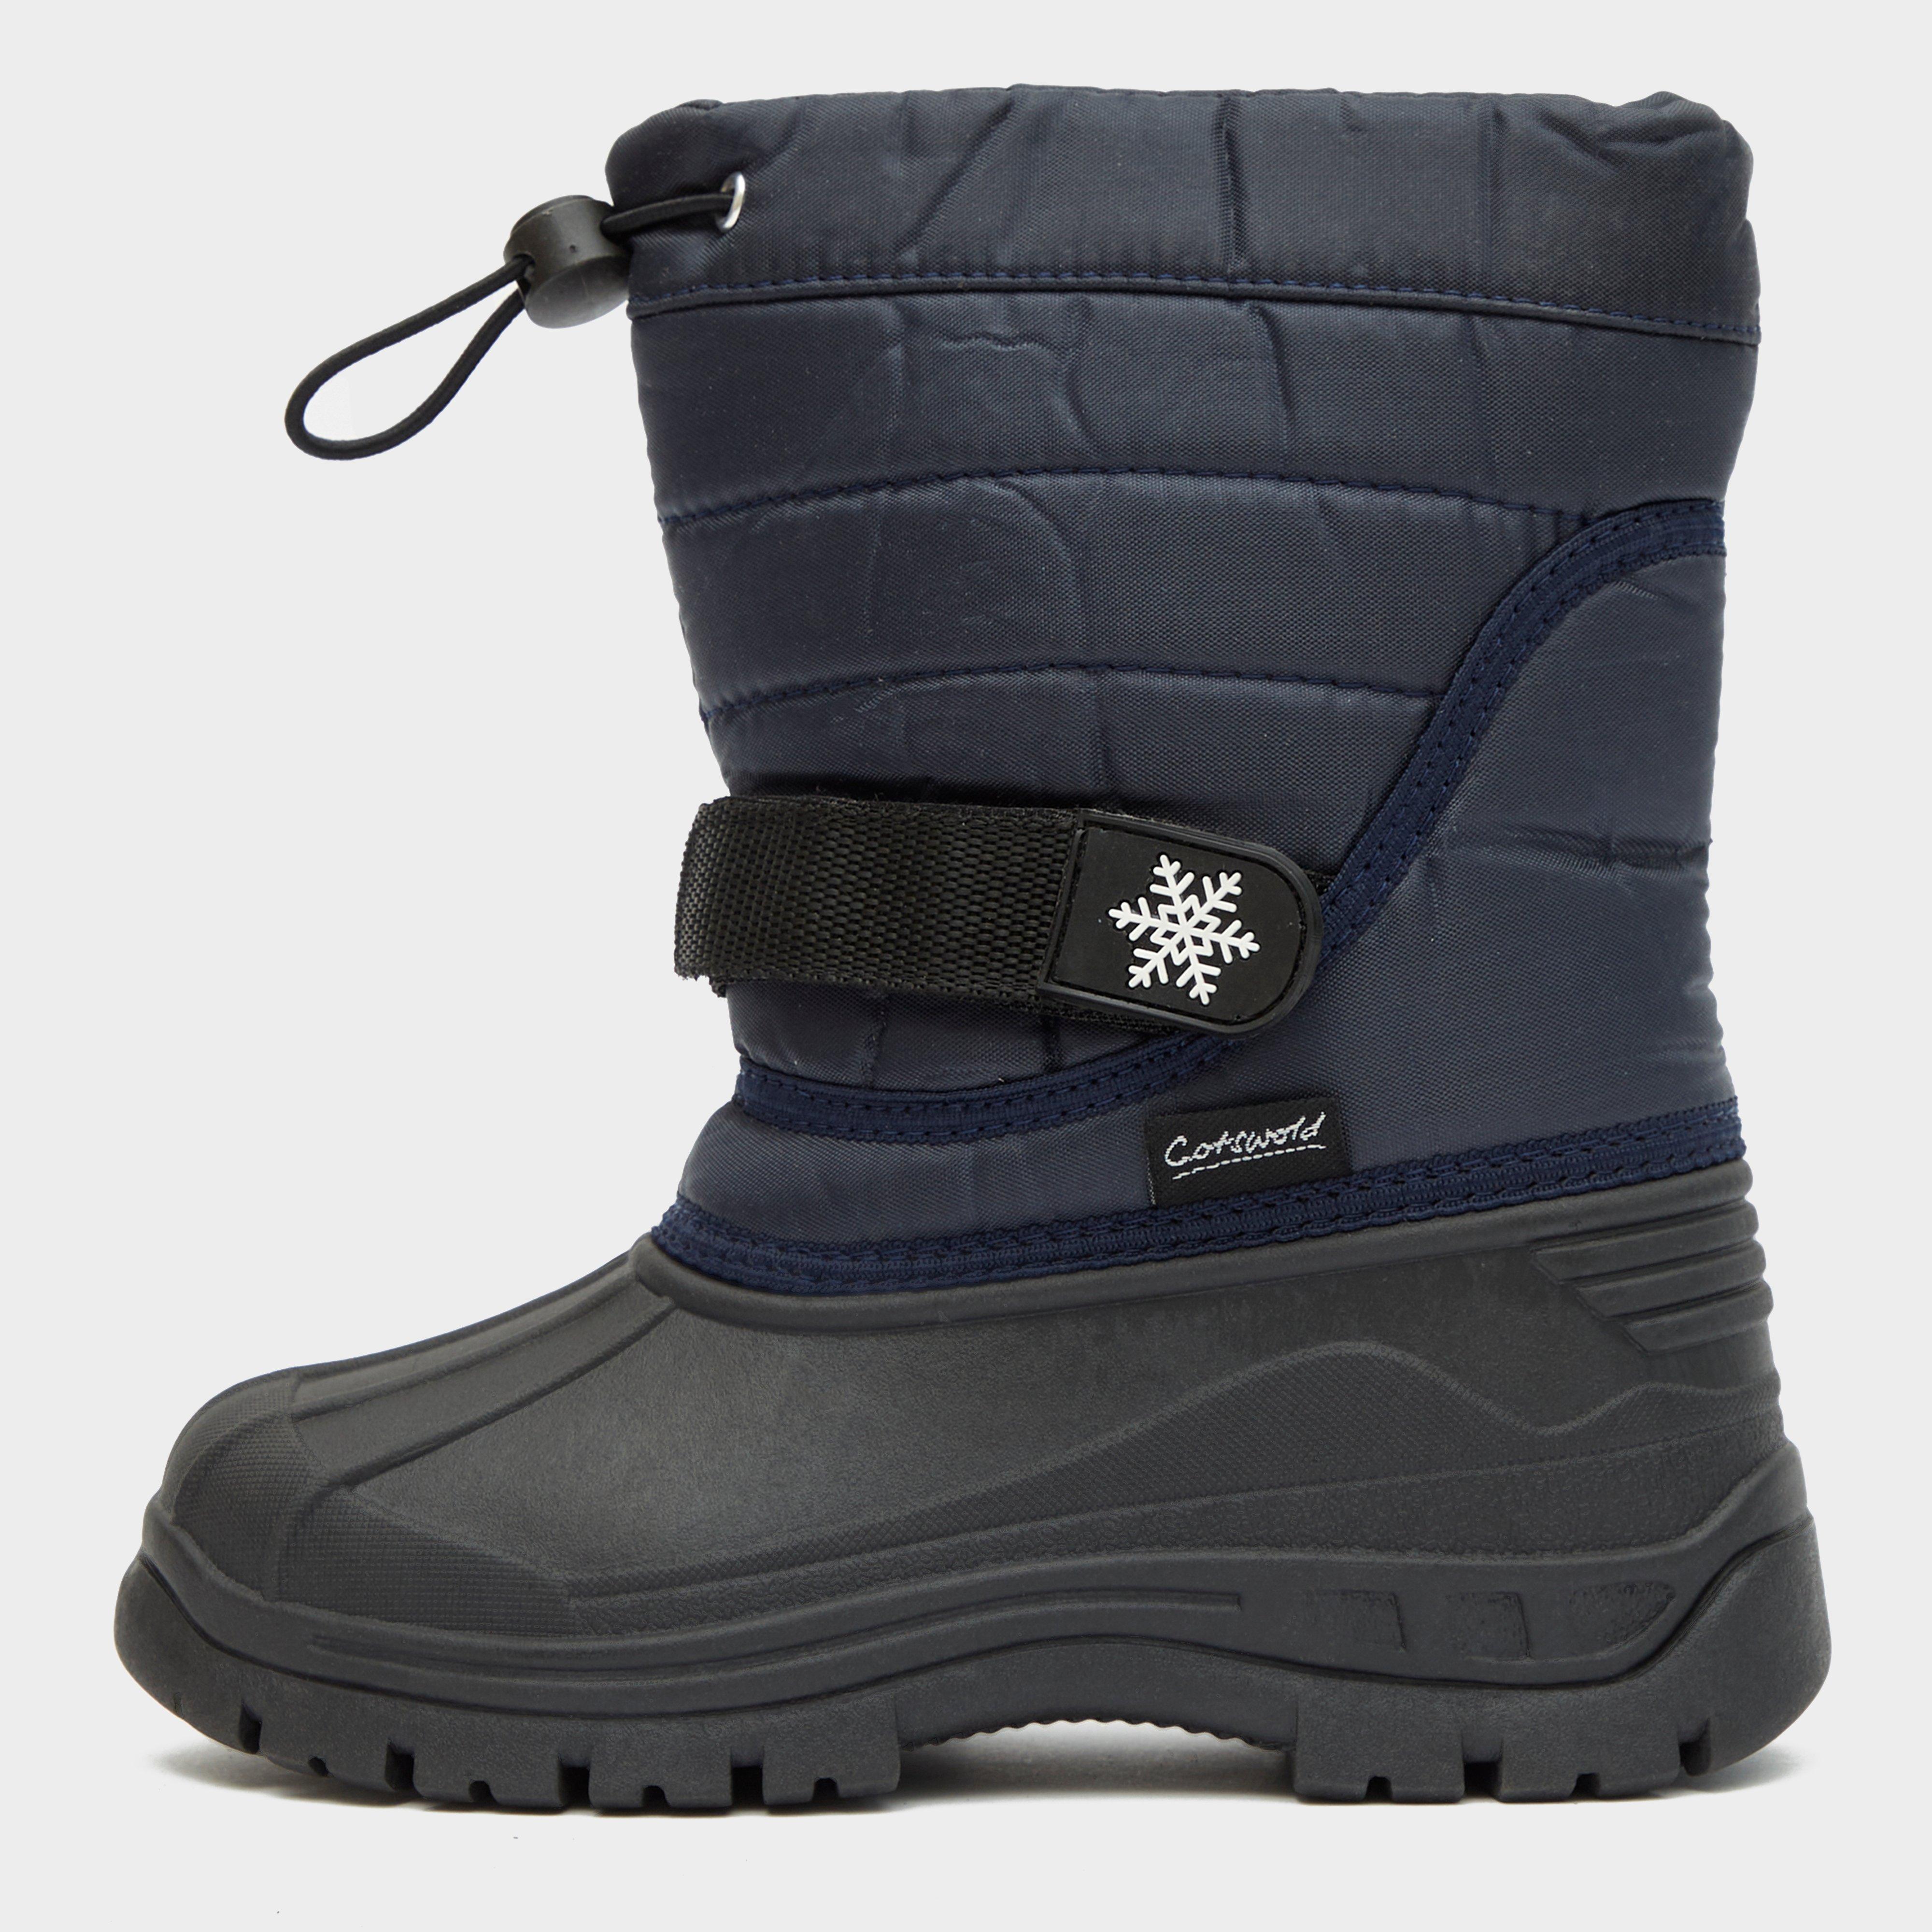 Cotswold Kids Icicle Snow Boot - Navy/navy  Navy/navy